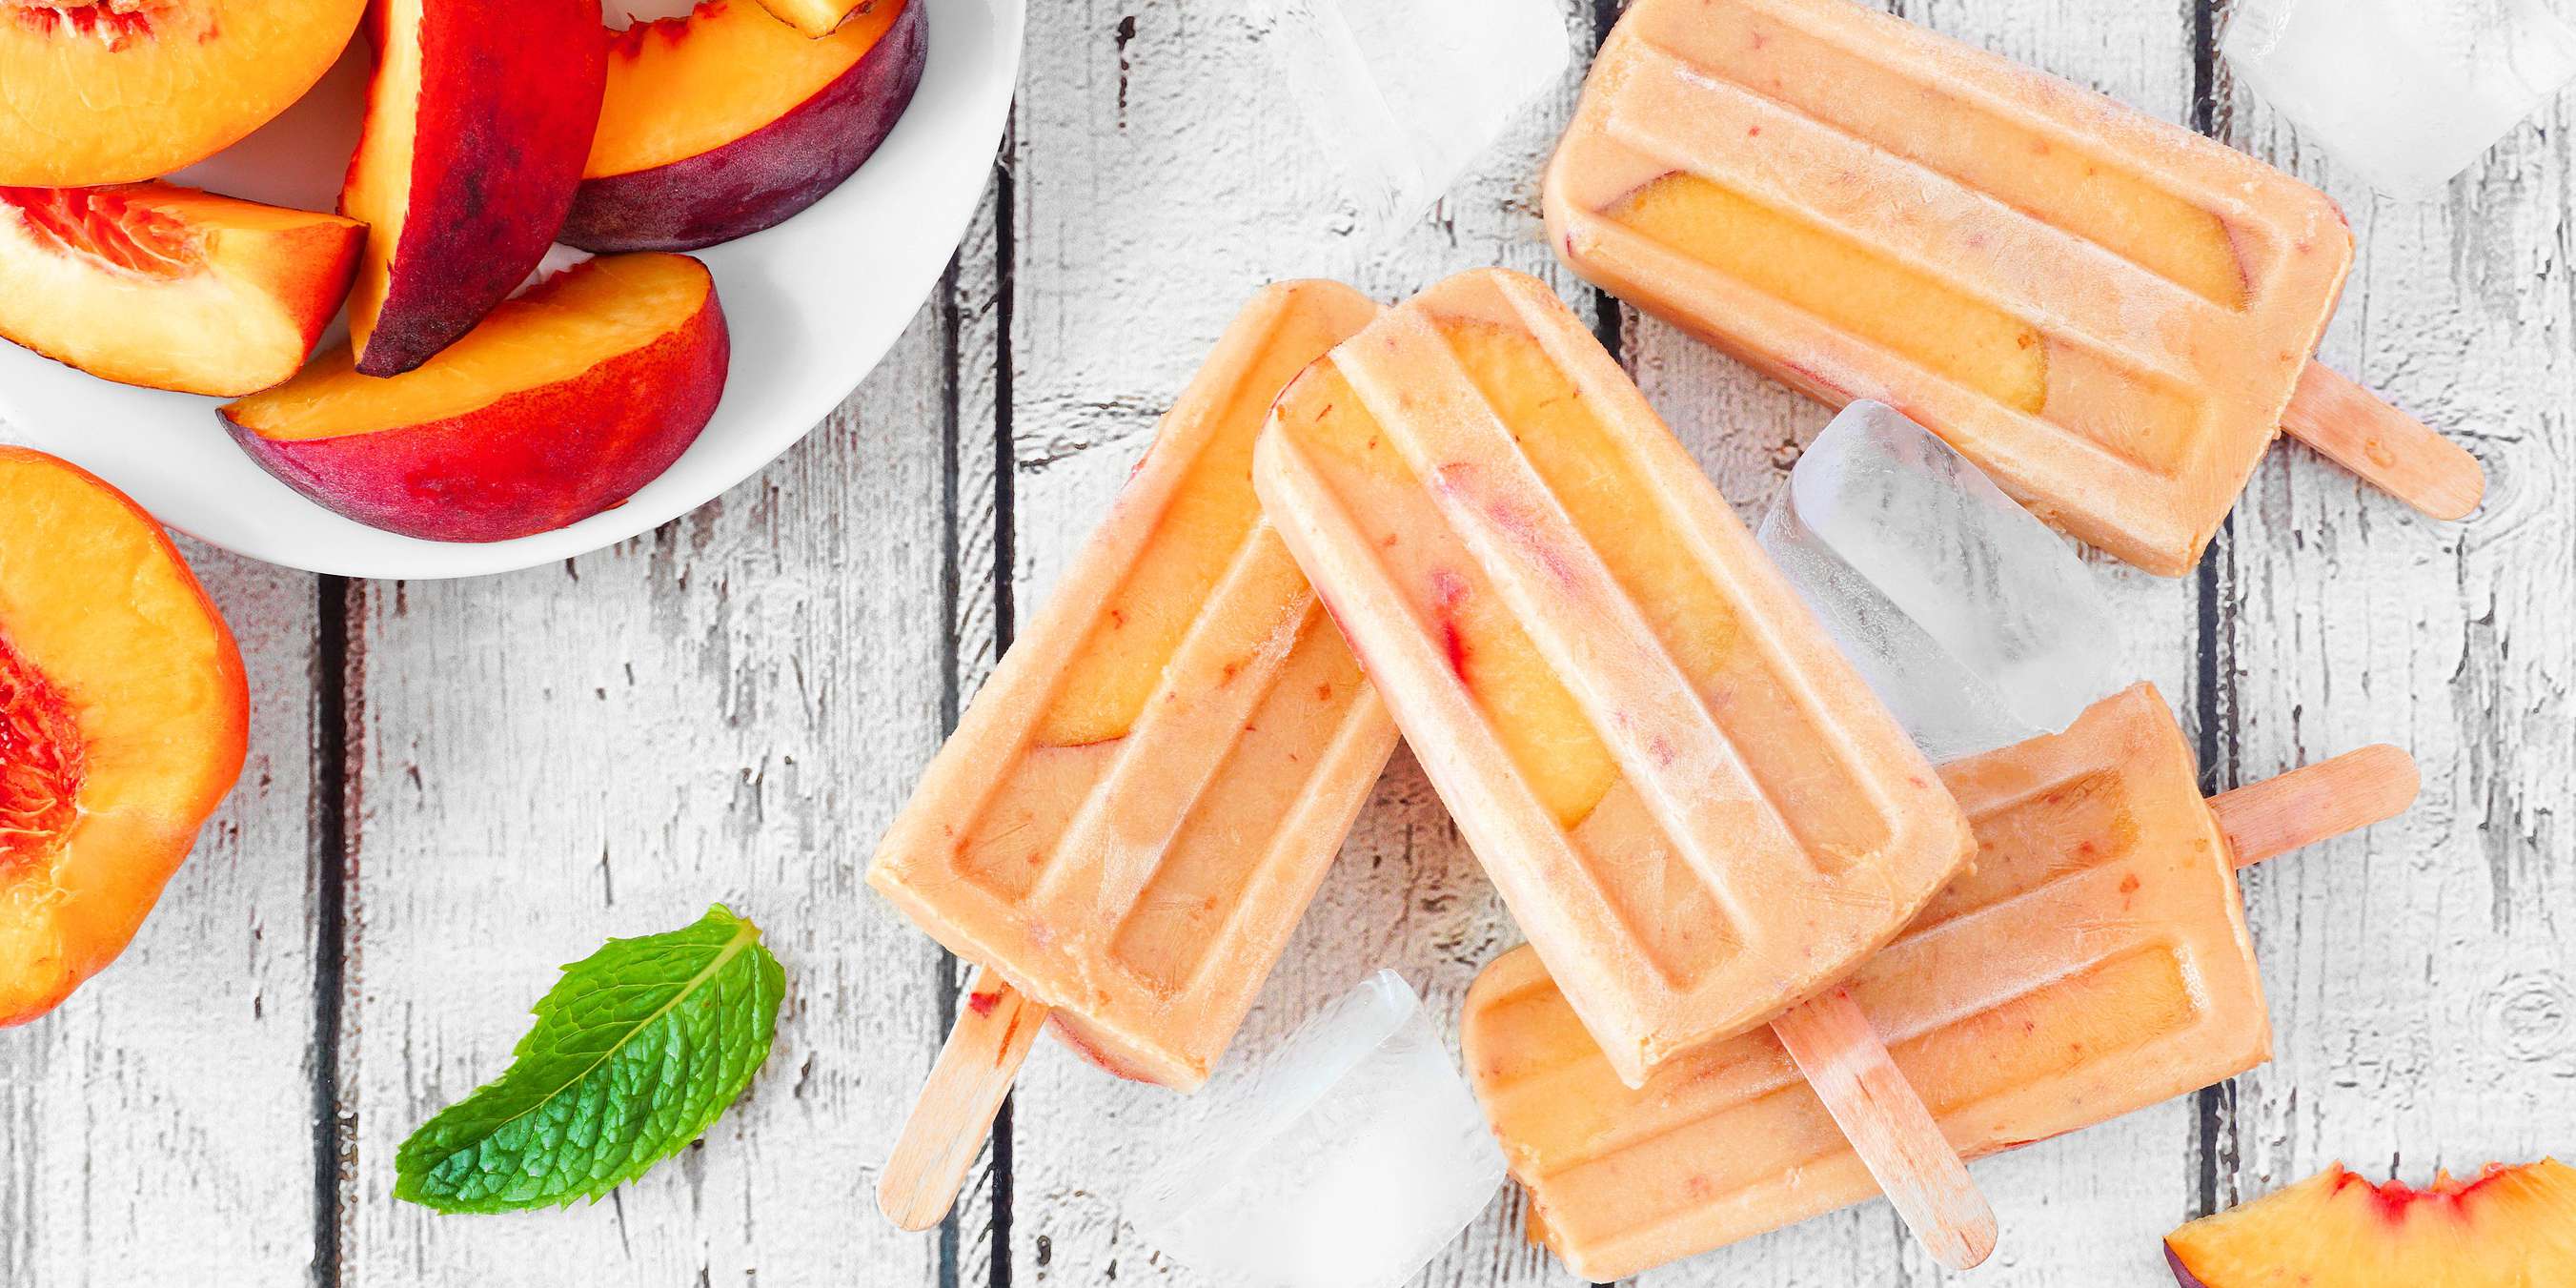 Peachy Keen Popsicles